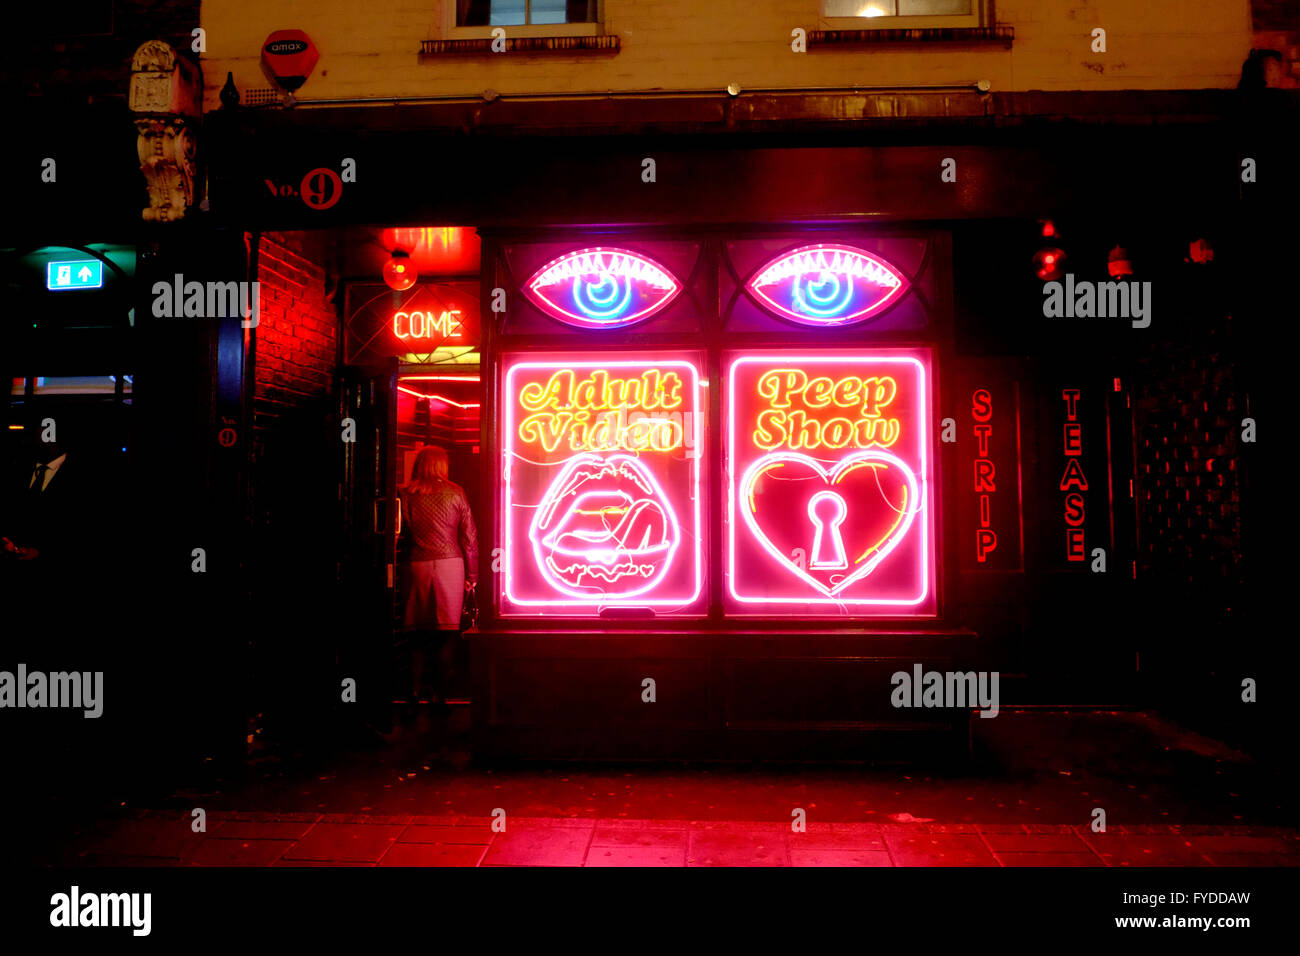 Woman entering Adult Video, Peep Show, Strip Tease, Sex store in Soho, London Stock Photo